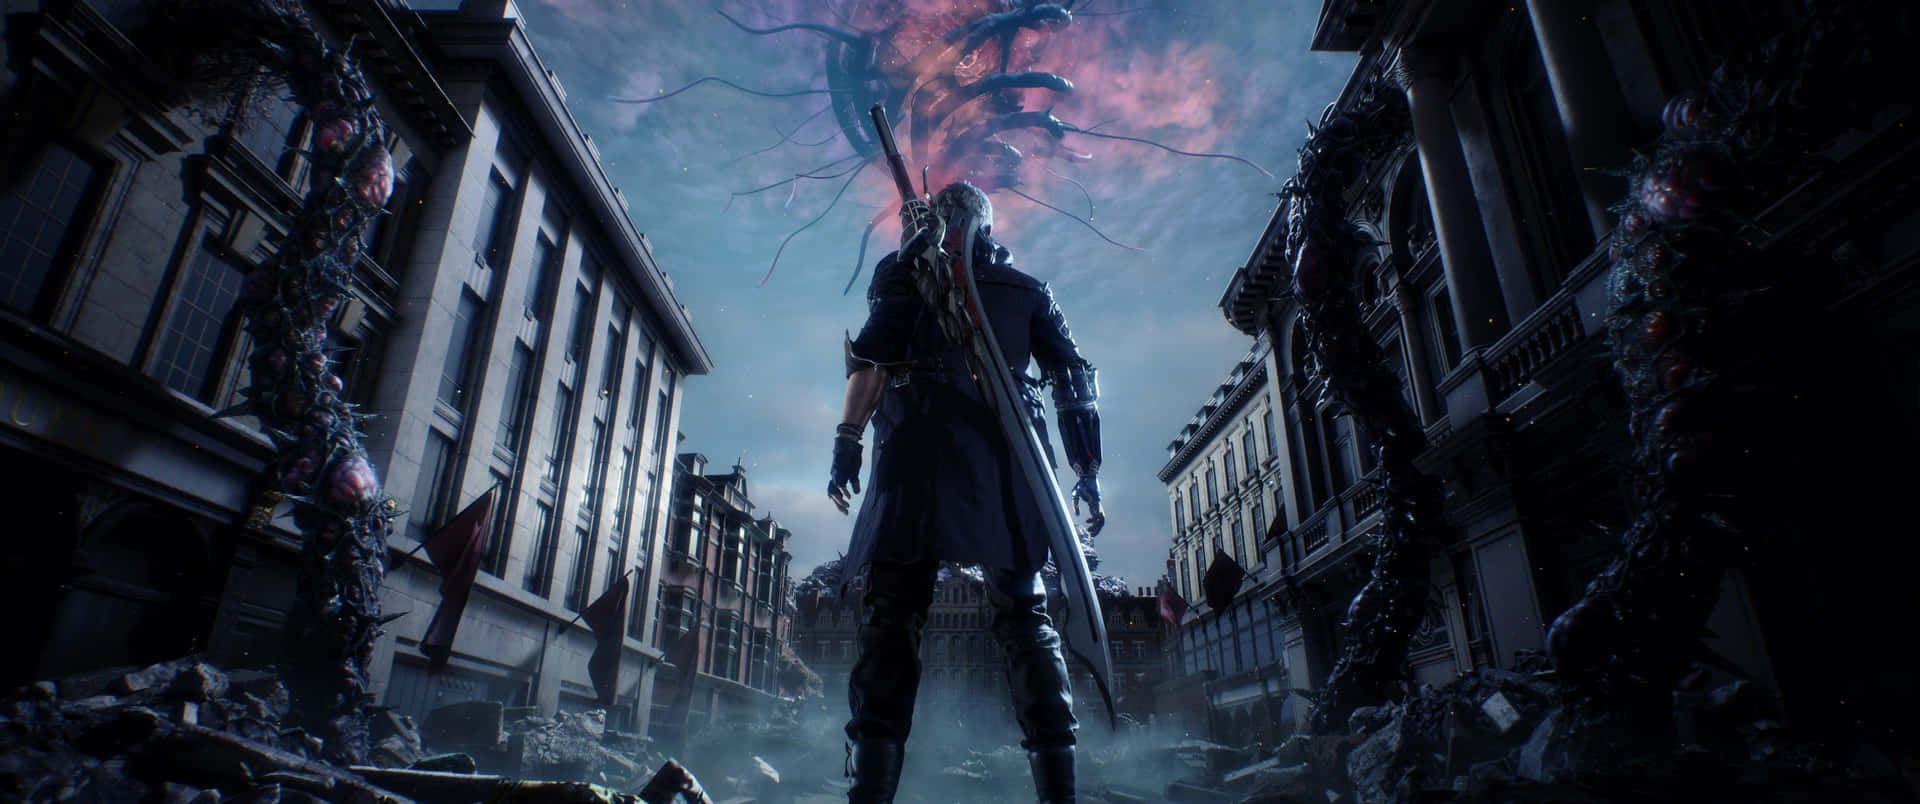 3440x1440 Game Devil May Cry 5 Background